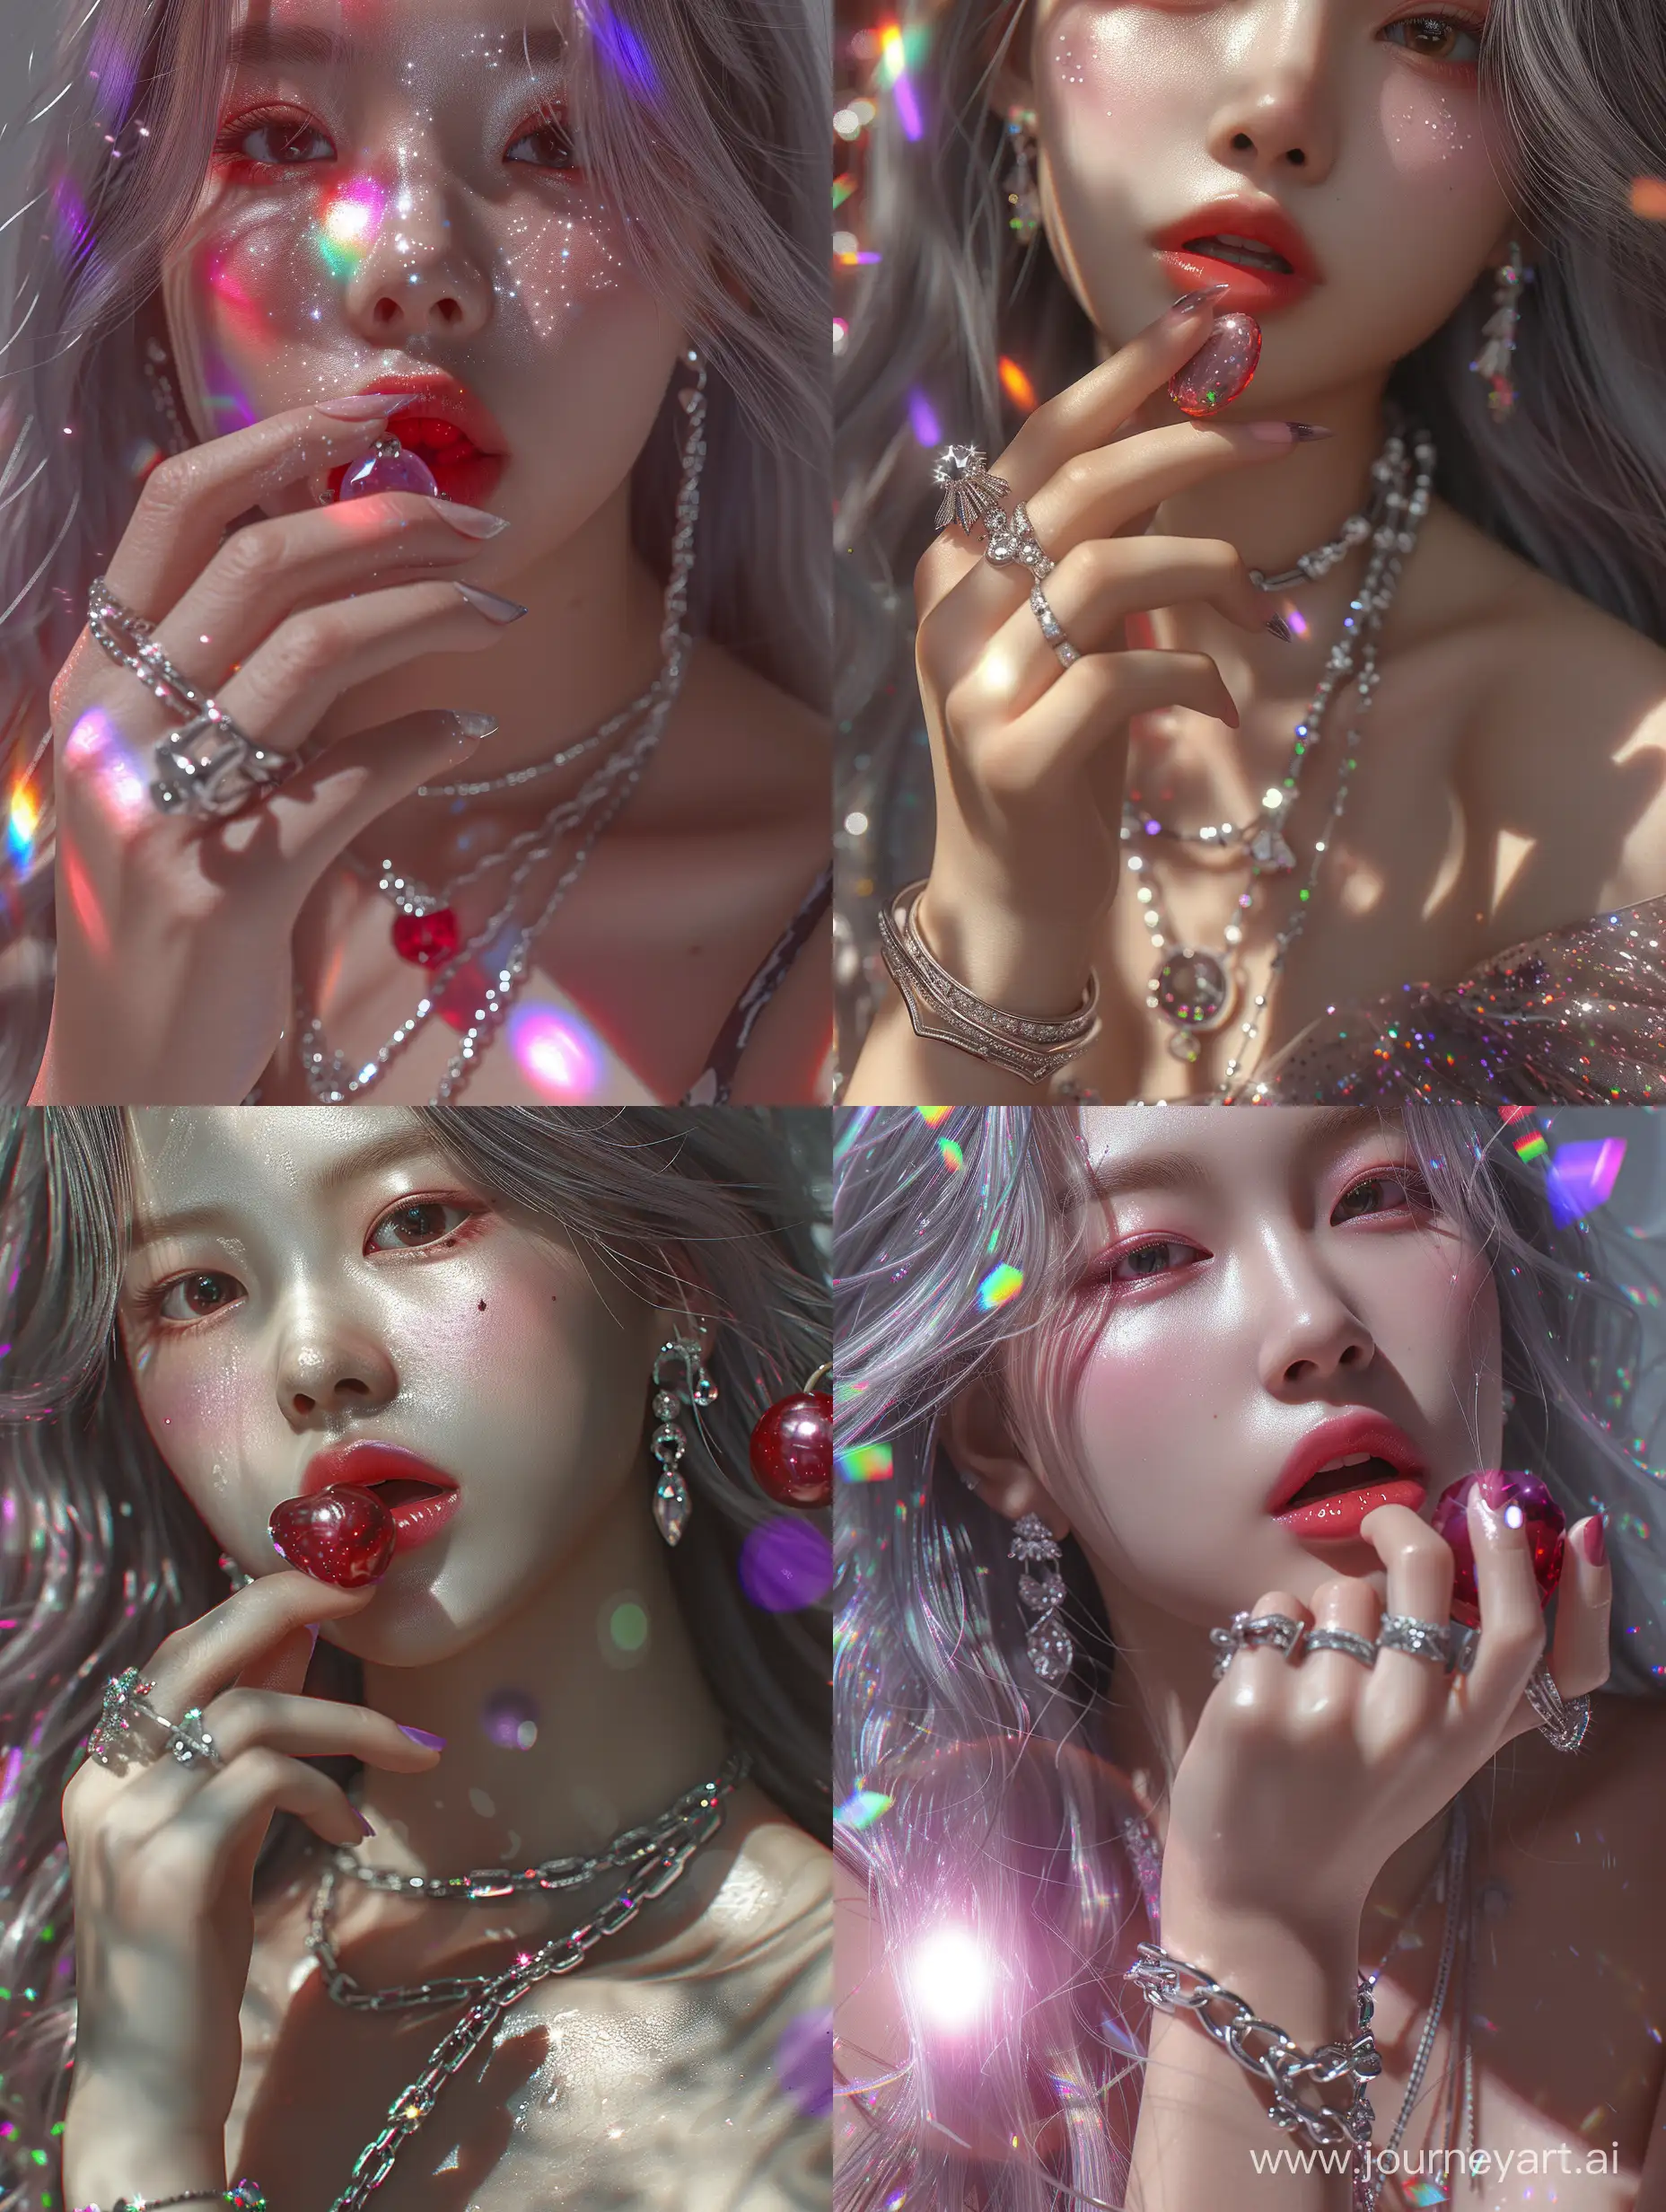 Realistic-Portrait-of-Asian-Girl-with-Silver-Gray-Hair-and-Cherry-Lips